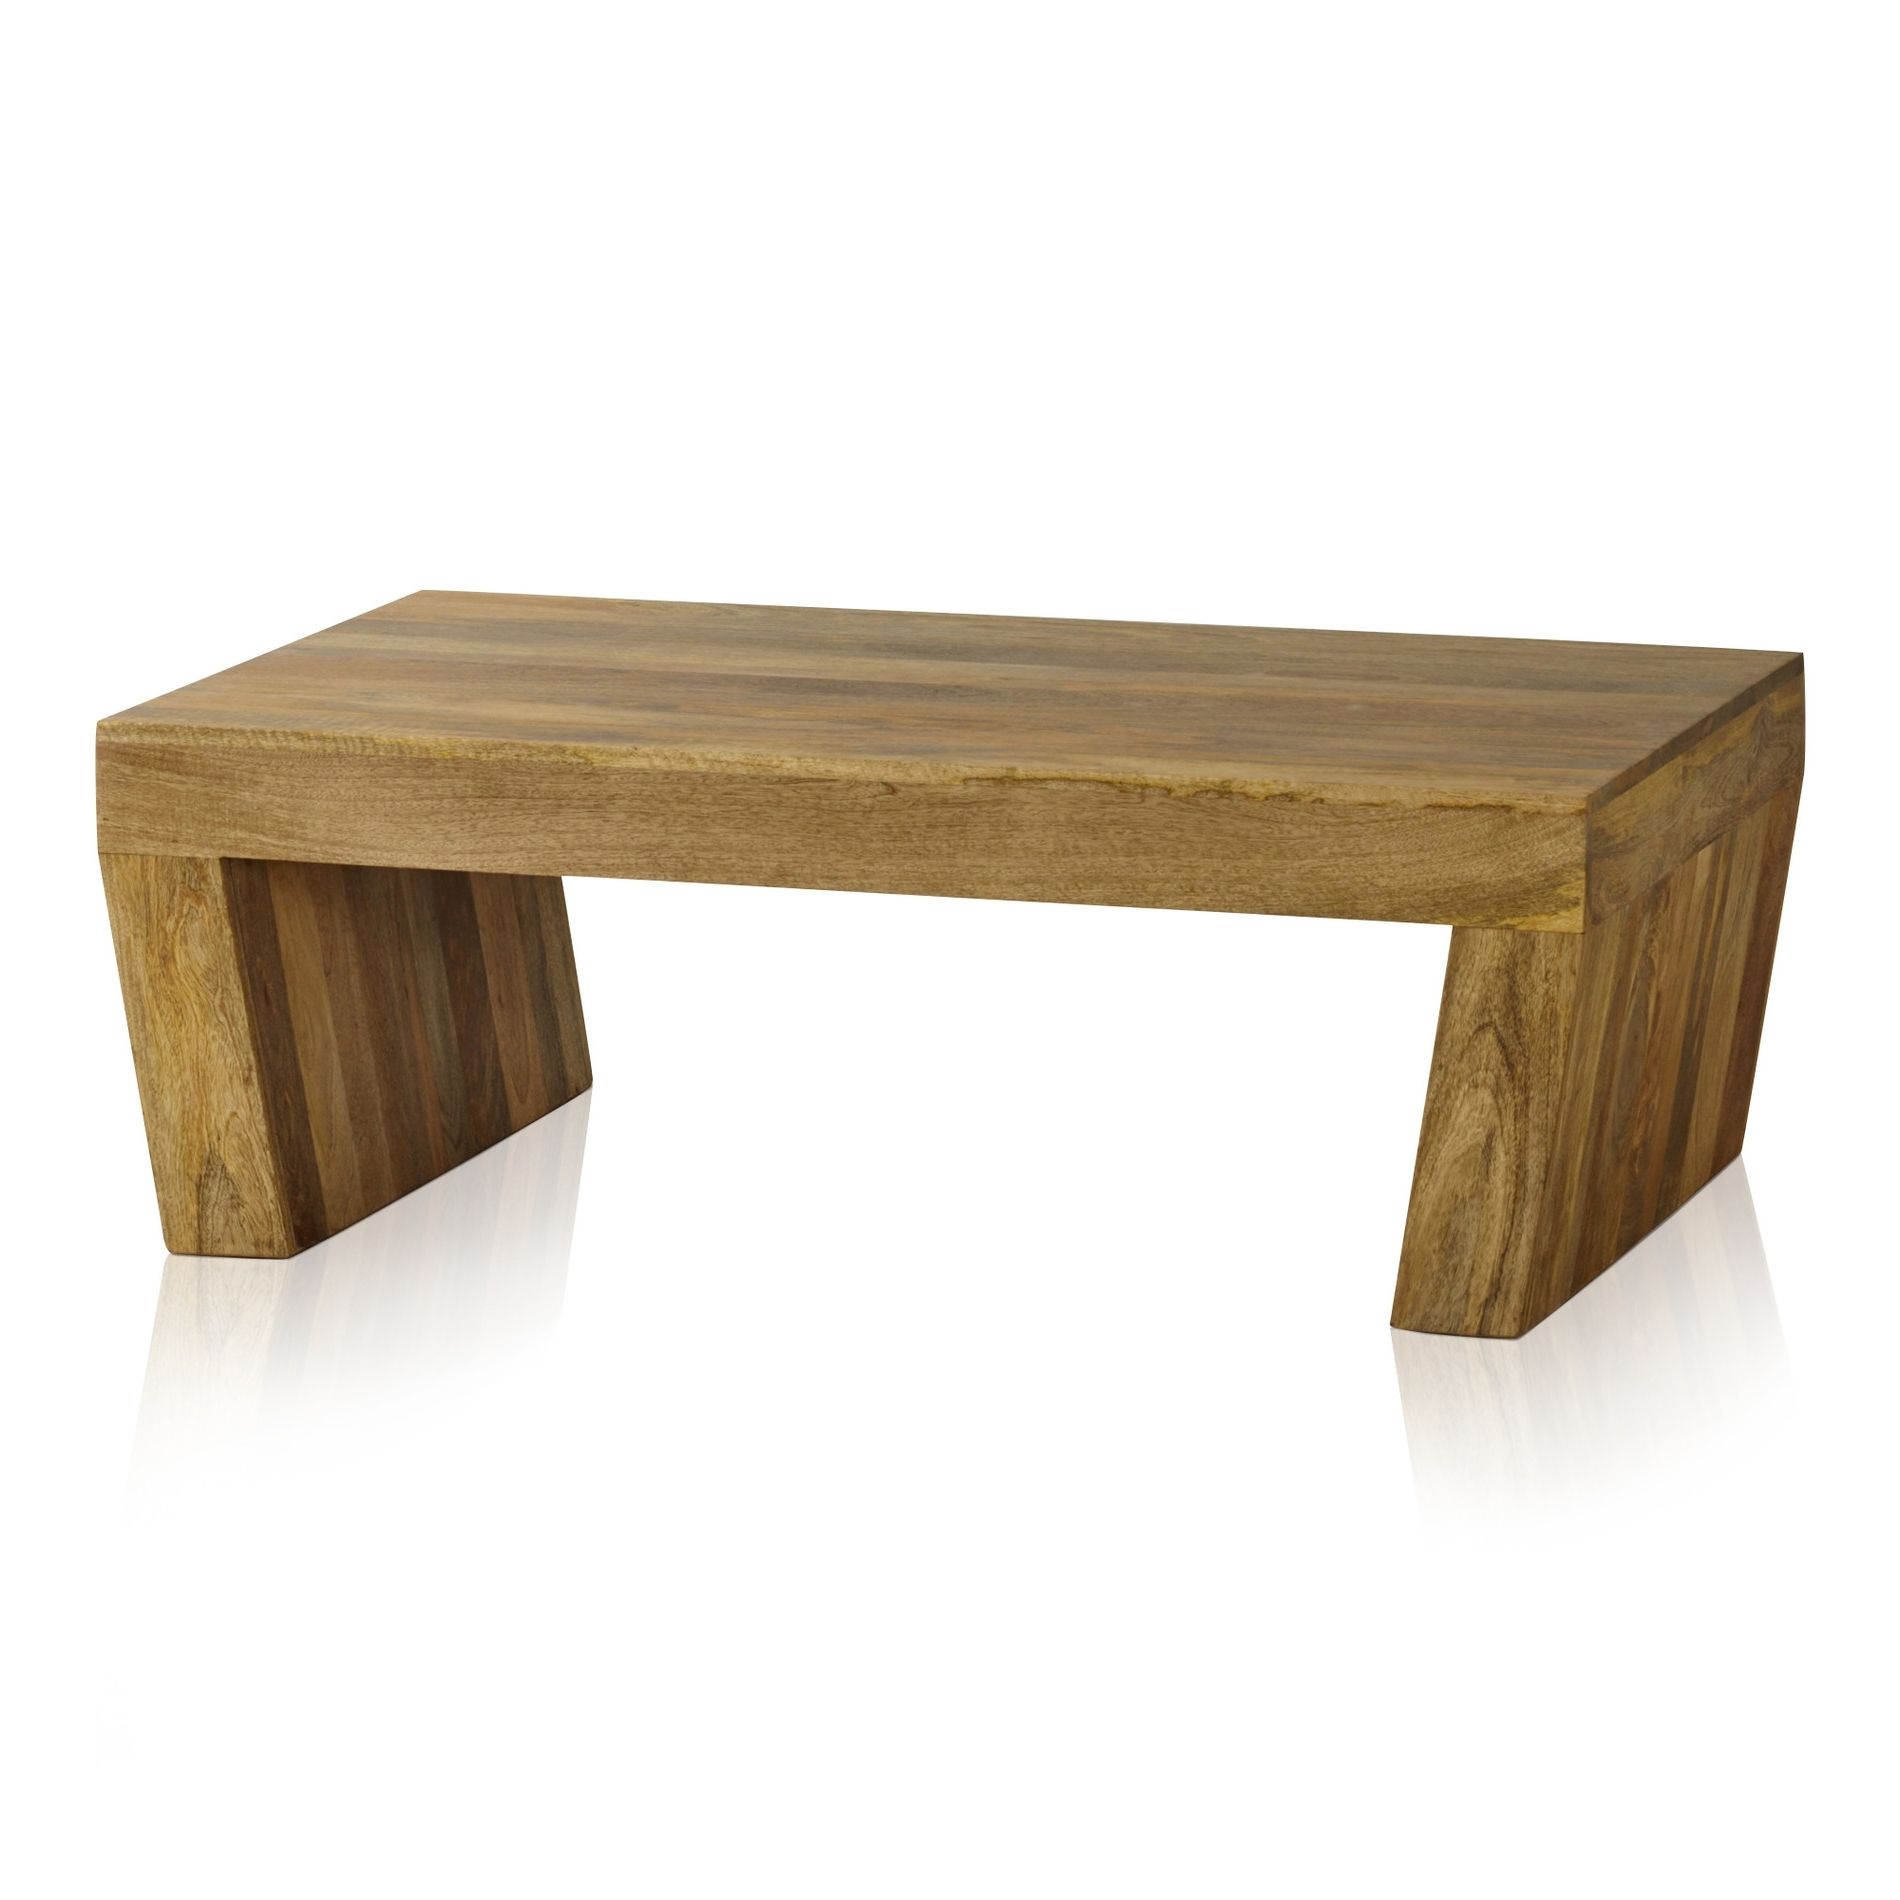 Mantis Light Natural Solid Mango Coffee Table With Angled Legs With Regard To Best And Newest Light Natural Coffee Tables (View 17 of 20)